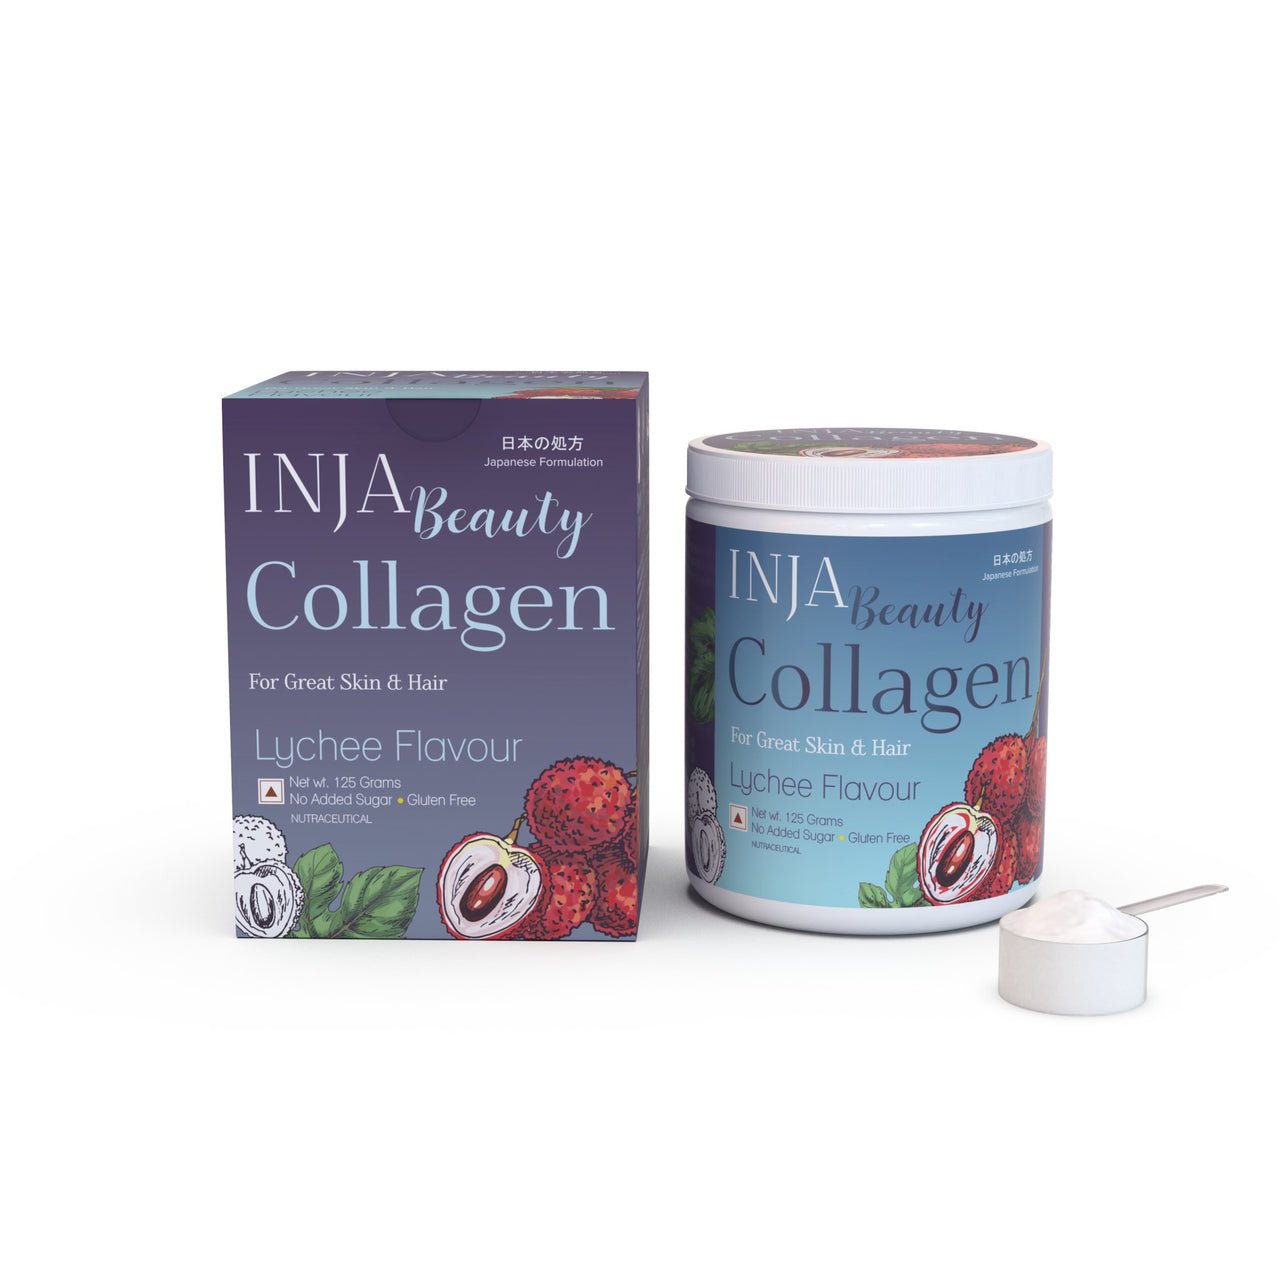 INJA Beauty Collagen for Skin, Hair & Nails, with Vit C, Glutathione,Biotin & more - Lychee Flavour - CBD Store India